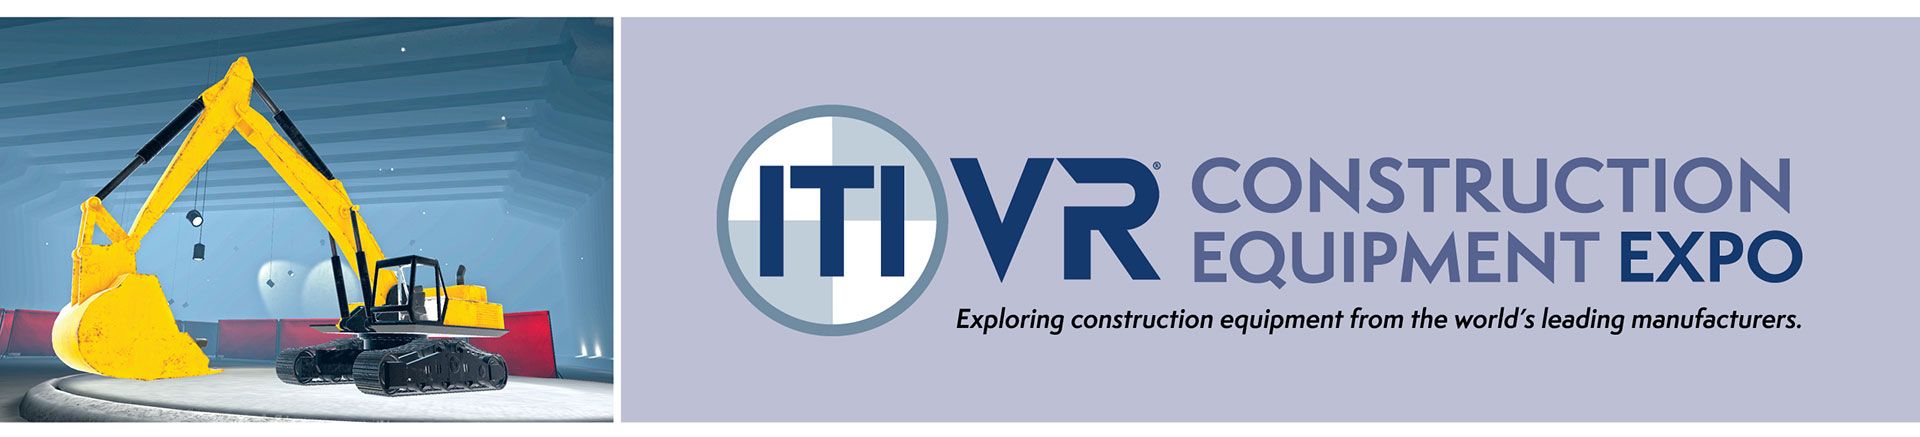 ITIVR-ISL-Expo-Banner